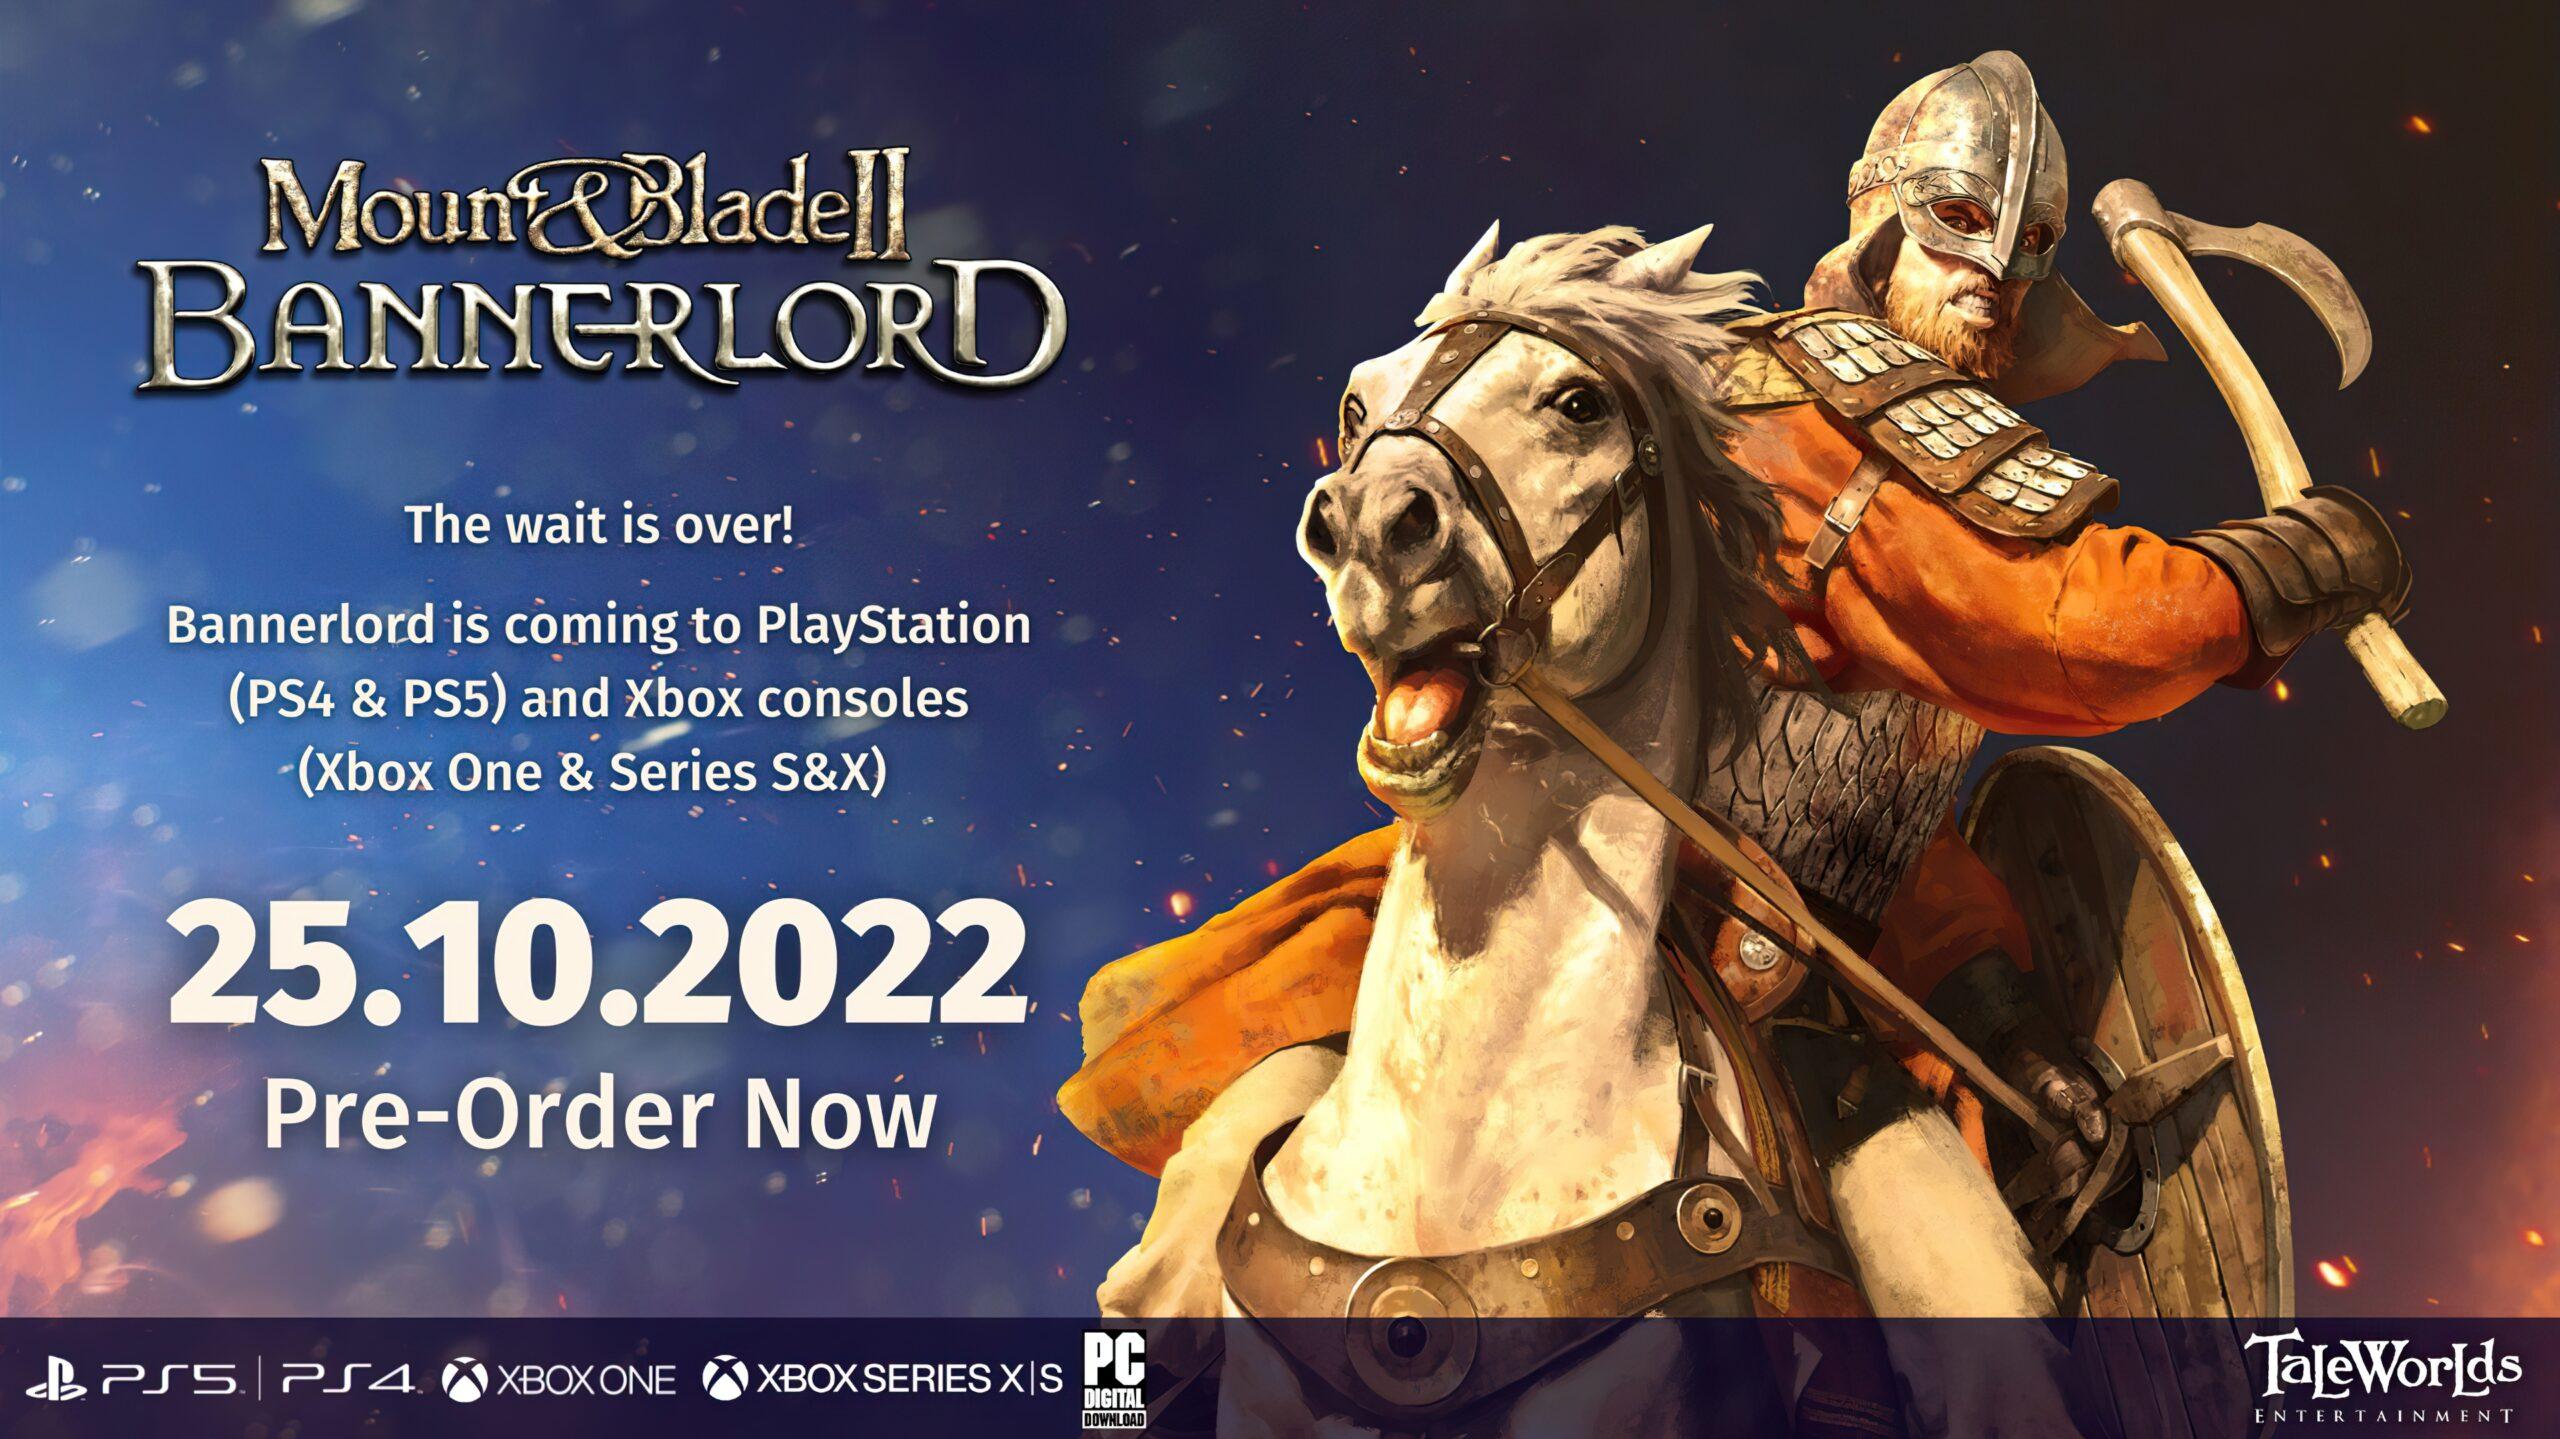 Mount Blade II Bannerlord Confirmed to Launch on October 25th